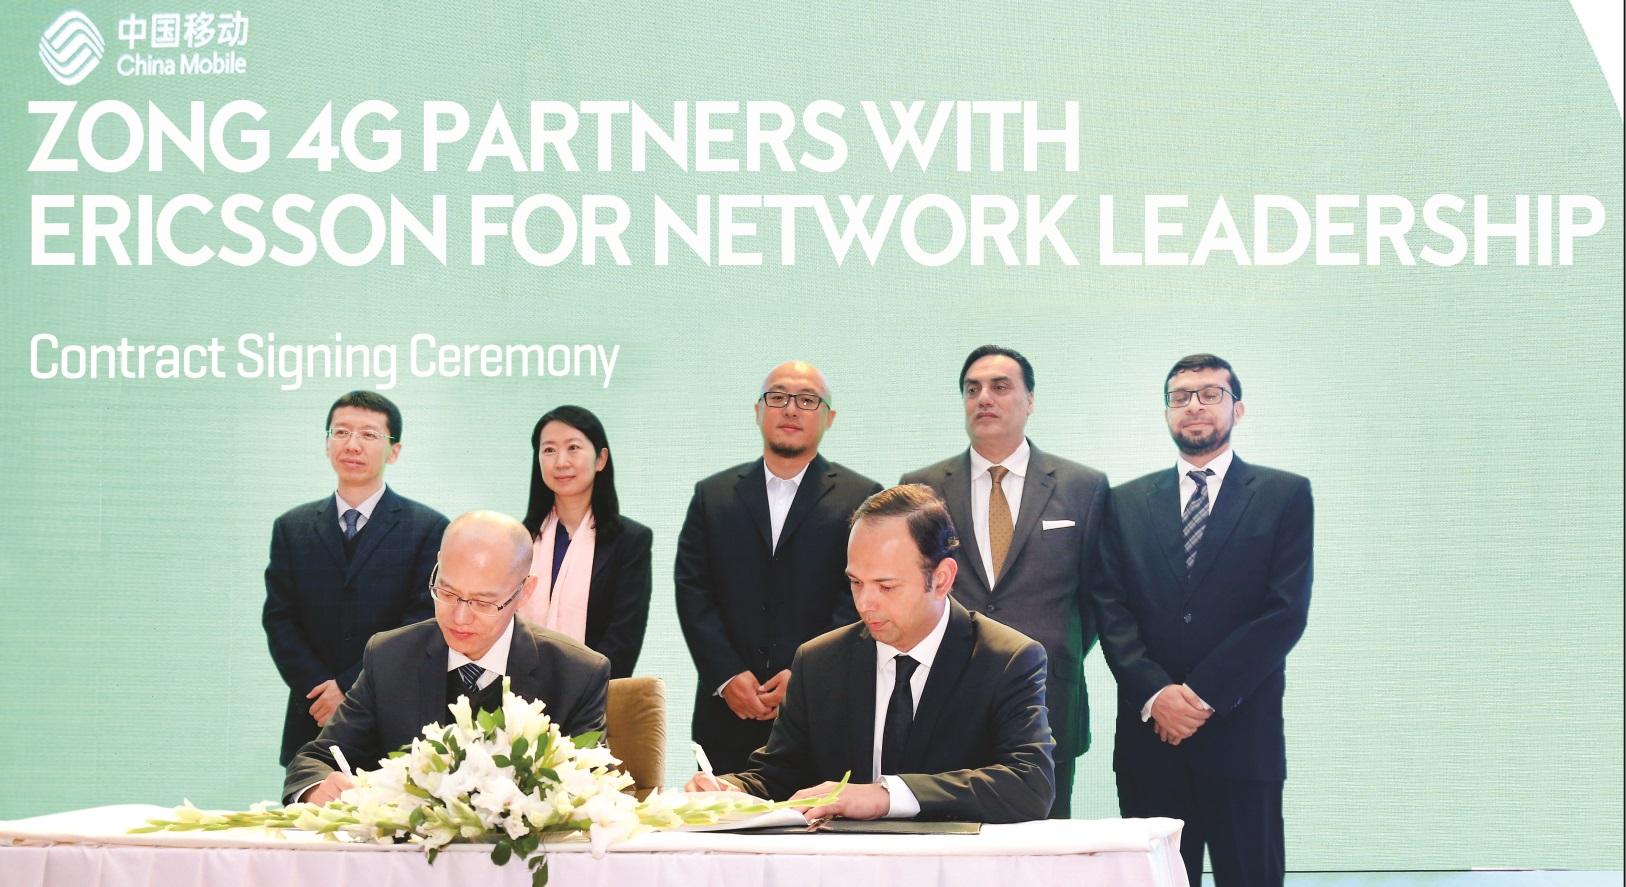 Zong 4G partners with Ericsson for Network Expansion